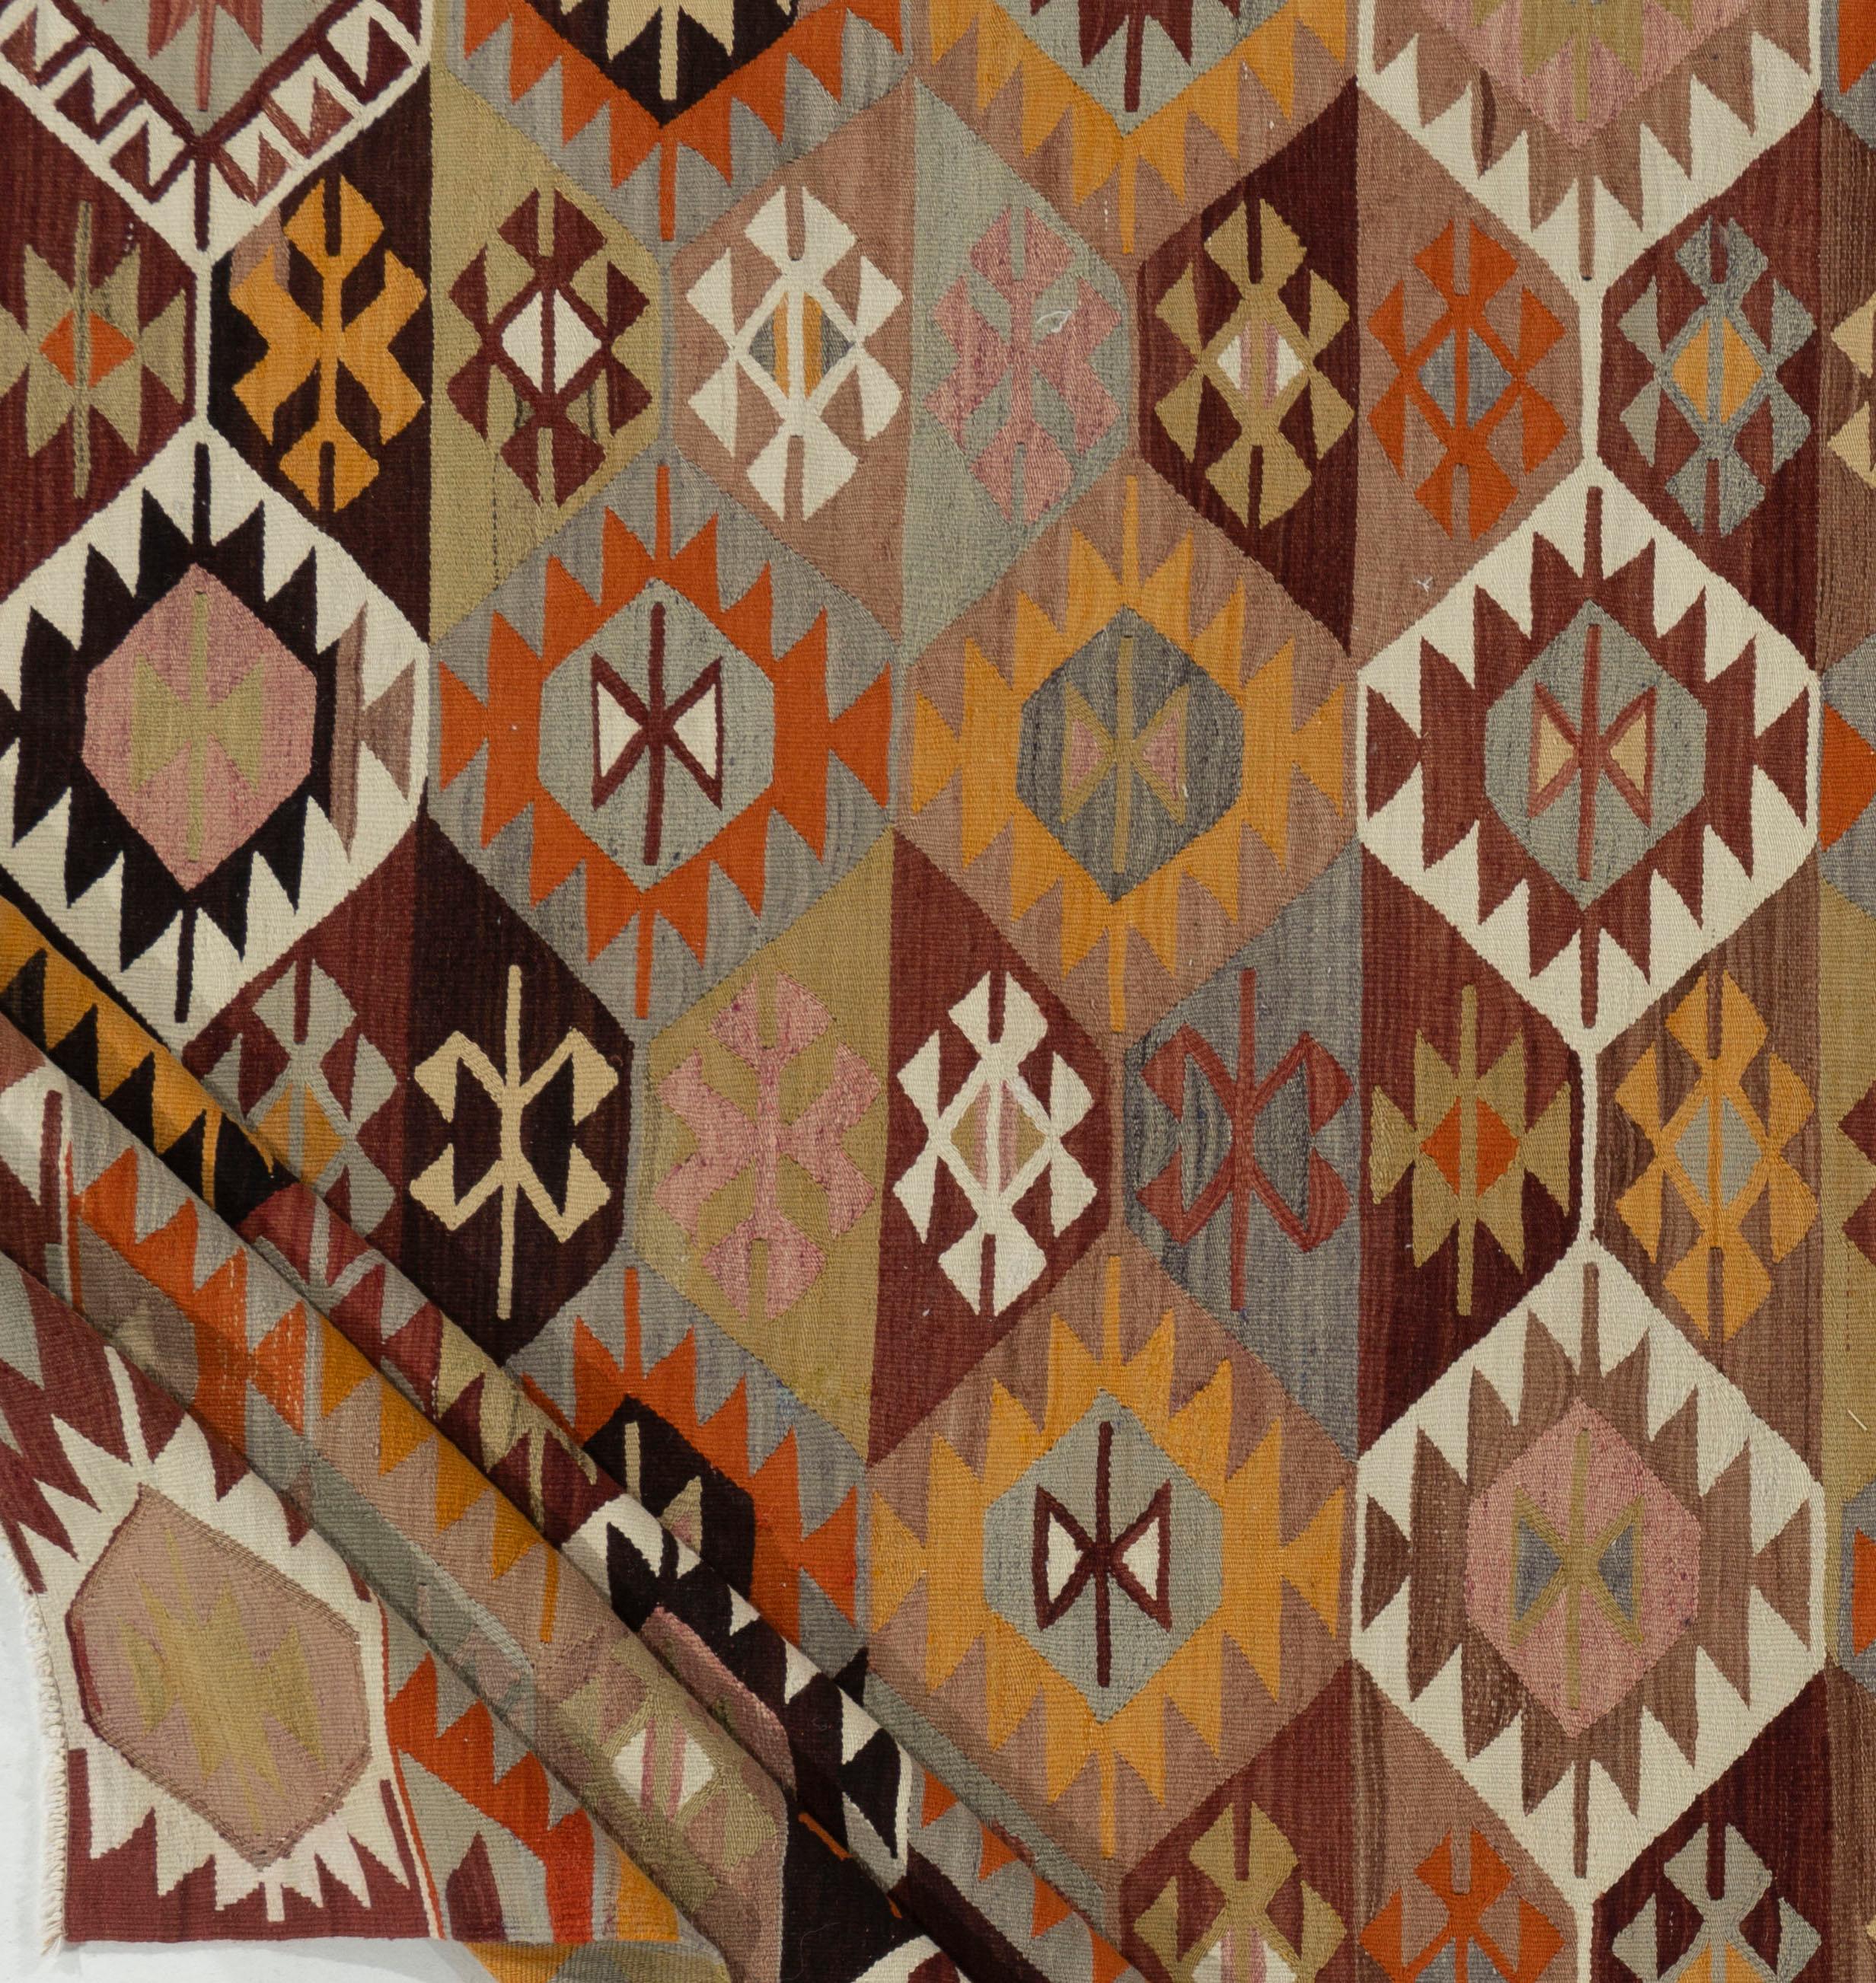 Vintage Turkish Kilim 5'4 X 9'4. This vintage Turkish flat weave Kilim is hand-woven. The simplicity and boldness of this piece can also give a contemporary feel and is able to look at home in both a modern and traditional setting. The geometric